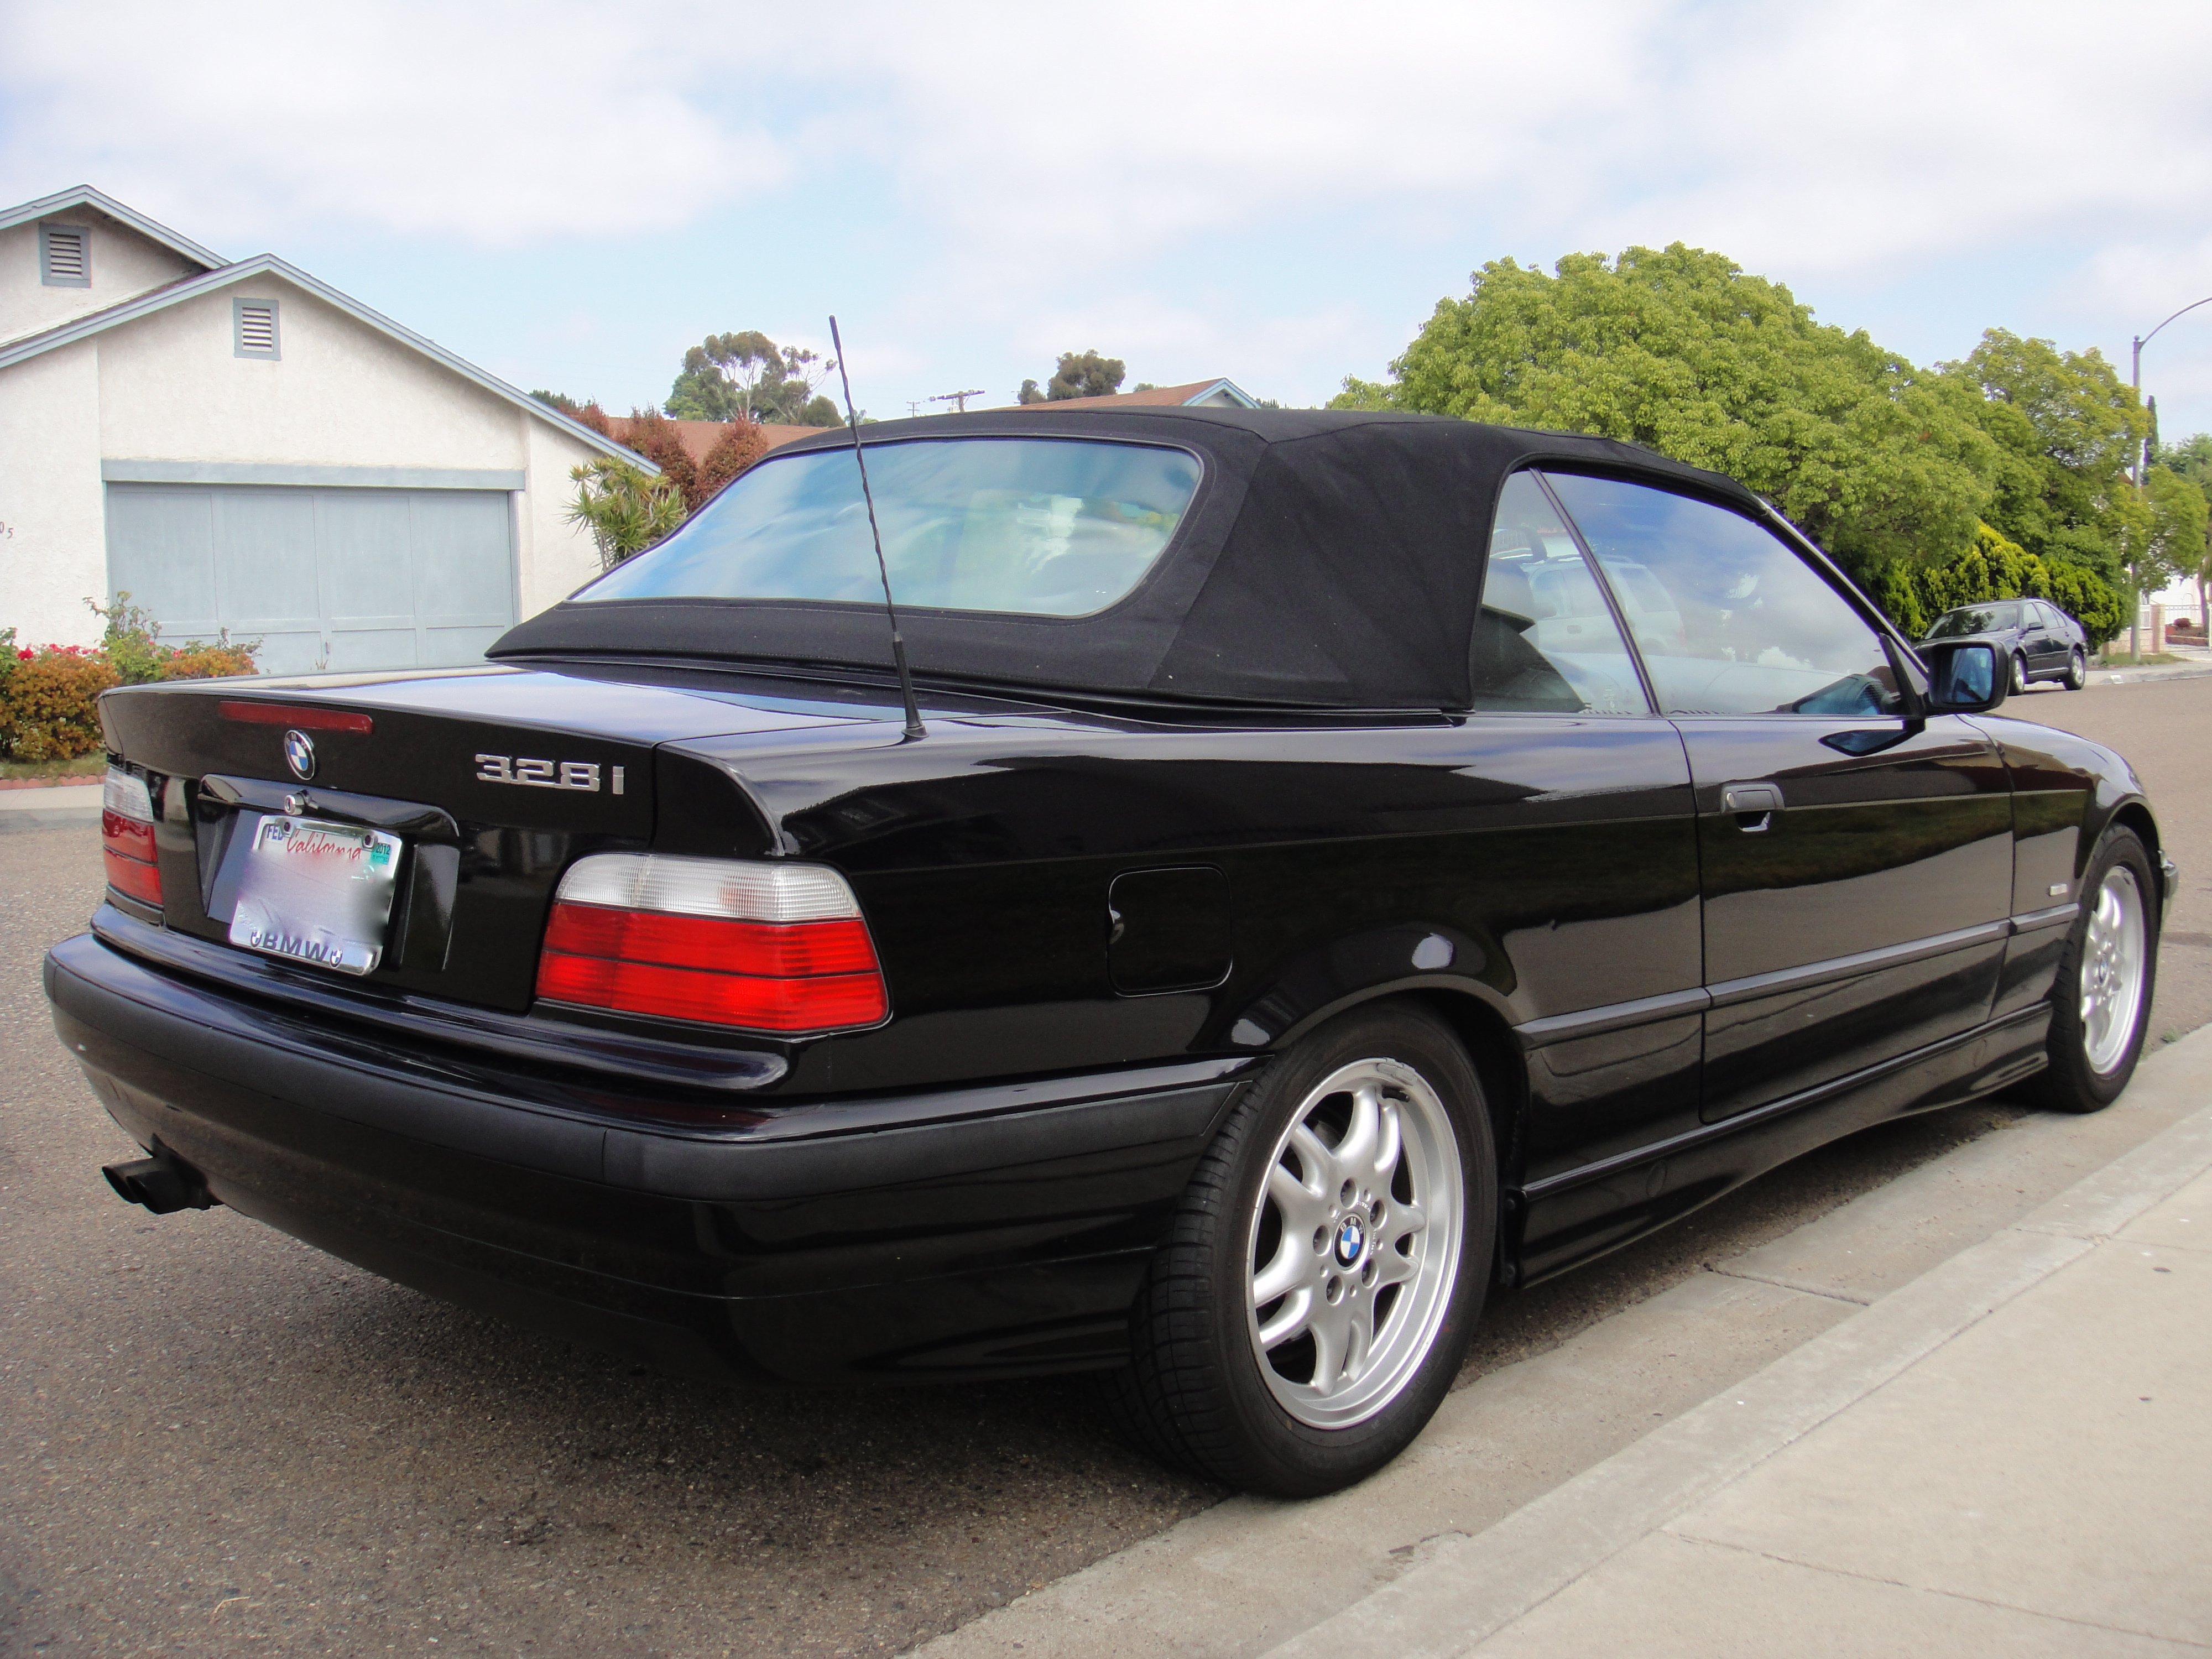 FOR SALE: 1998 BMW 328i Convertible | Flickr - Photo Sharing!